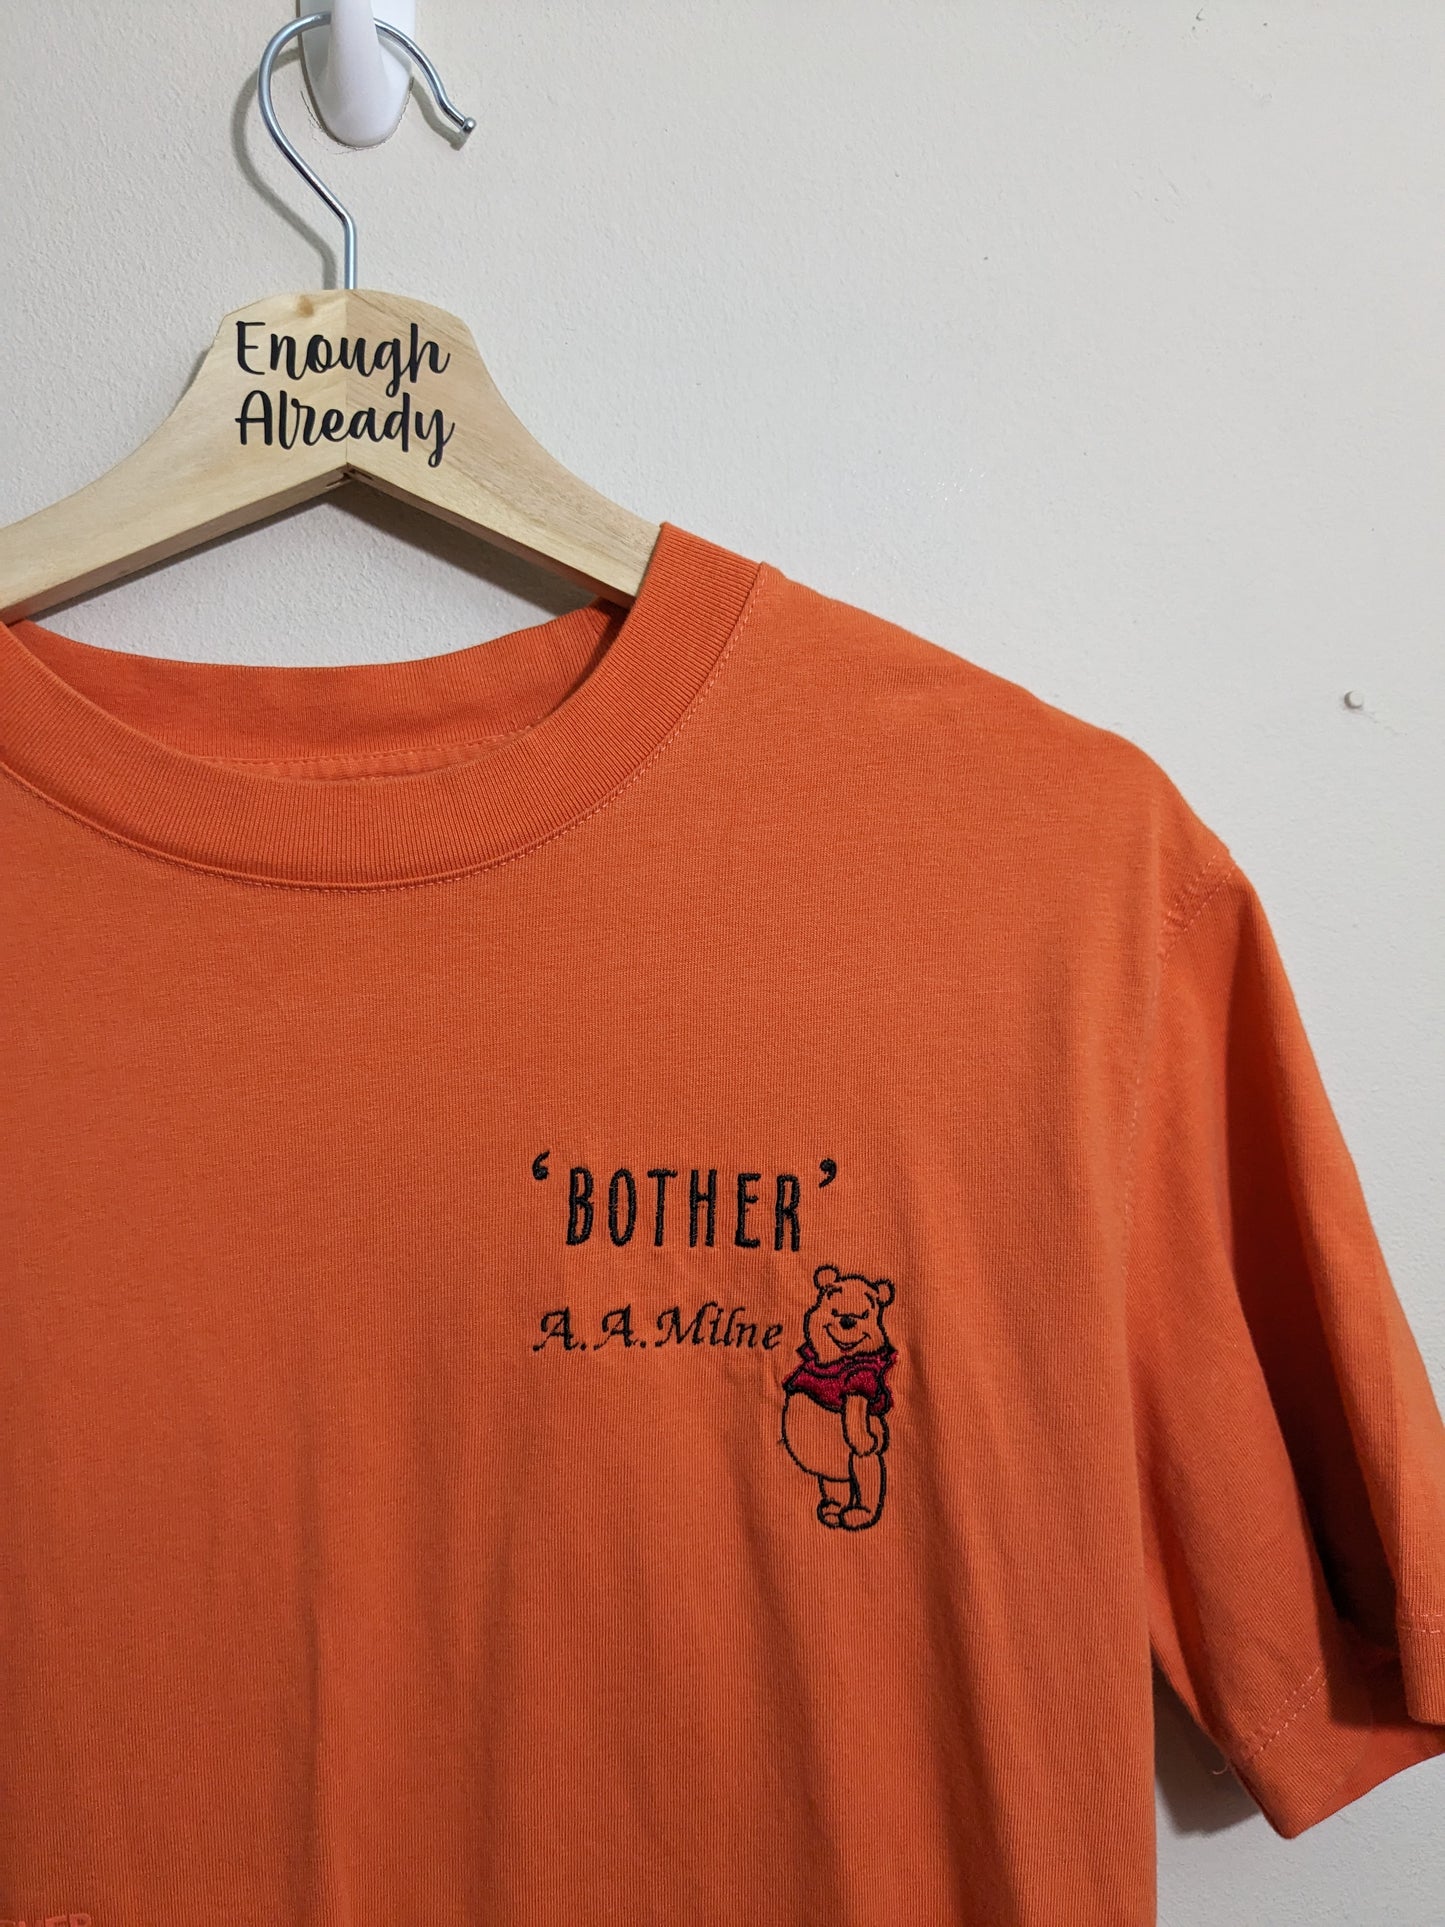 Size Small Orange and Classic Red Check Pyjama Set - Embroidered Winnie The Pooh 'Bother' Design - A. A. Milne Quote